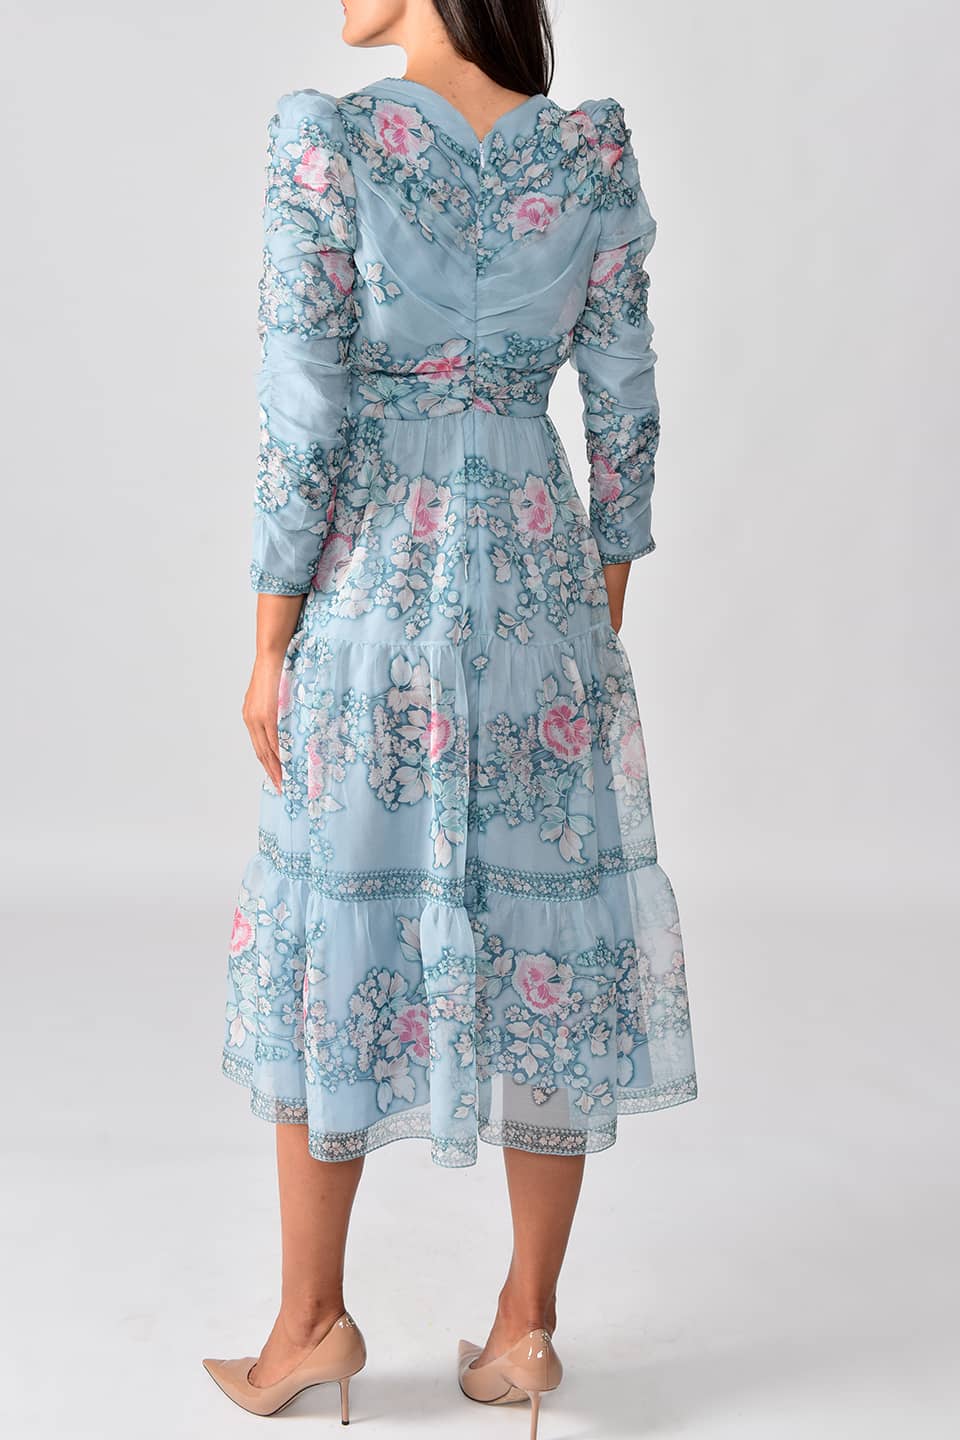 Thumbnail for Product gallery 2, Model wearing floral print silk chiffon tiered long dress in a pale blue color from stylist Vilshenho, posing from behind 